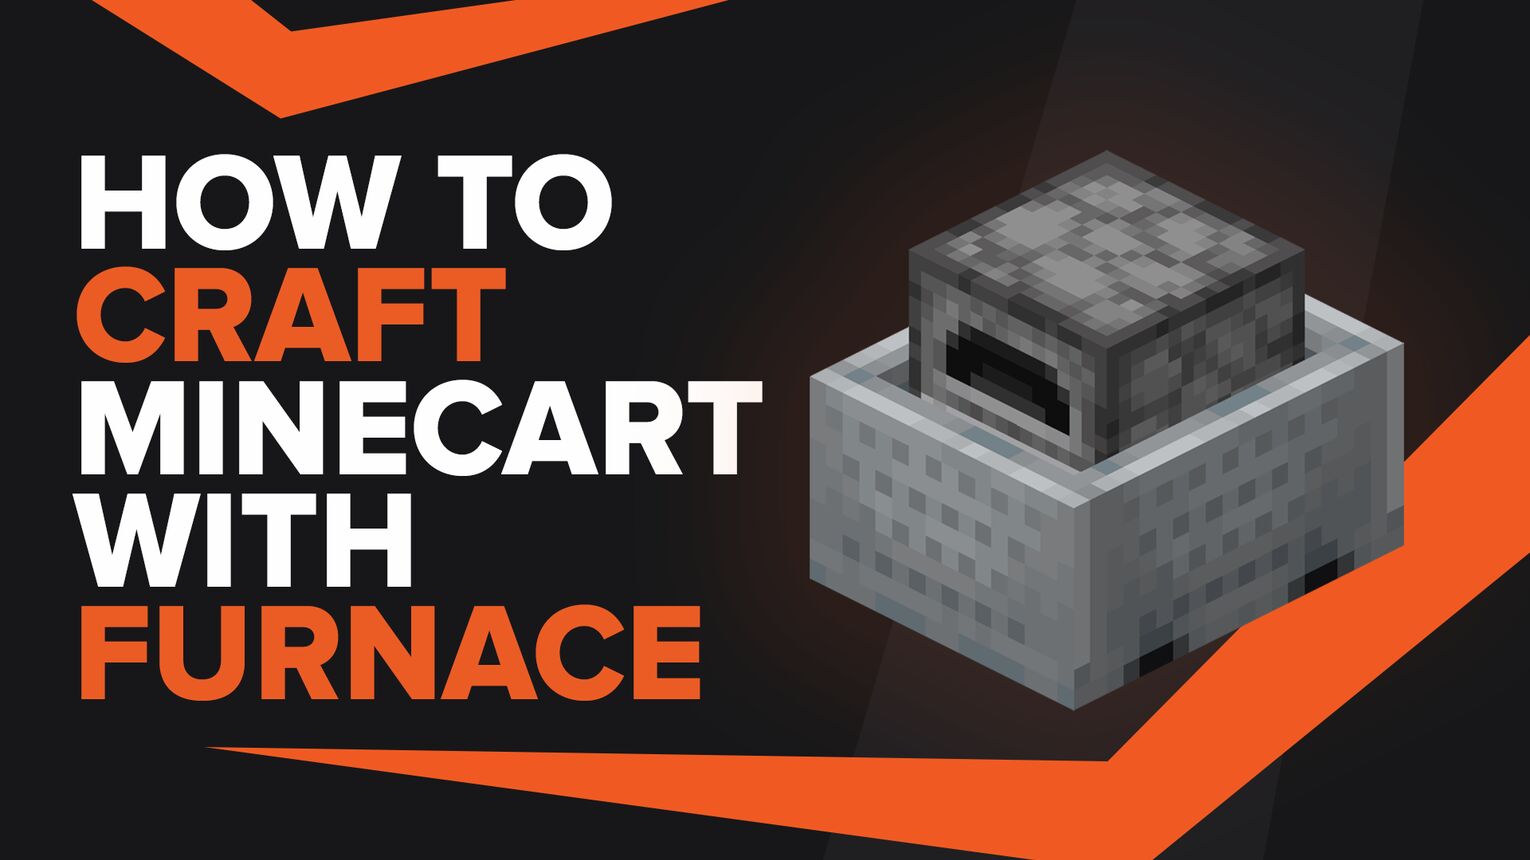 How To Make Minecart With Furnace In Minecraft